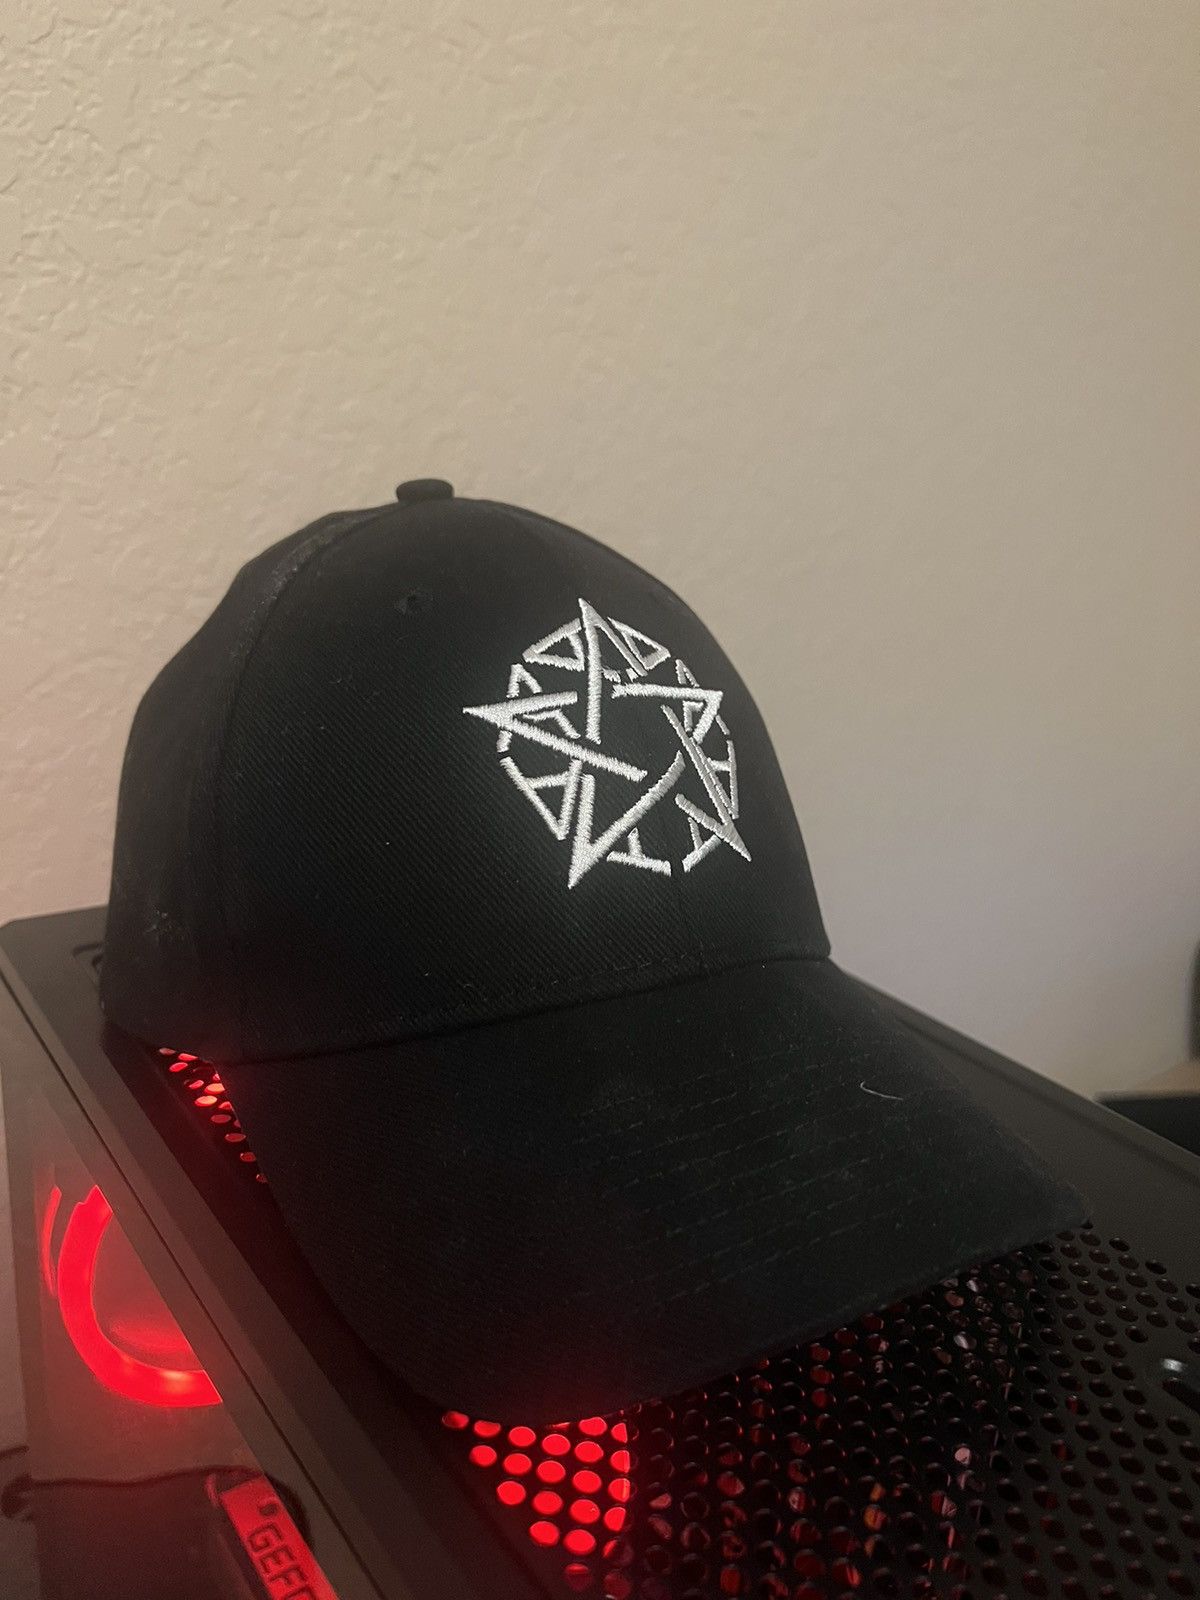 1017 ALYX 9SM Alyx Destroy Lonely hat | Grailed